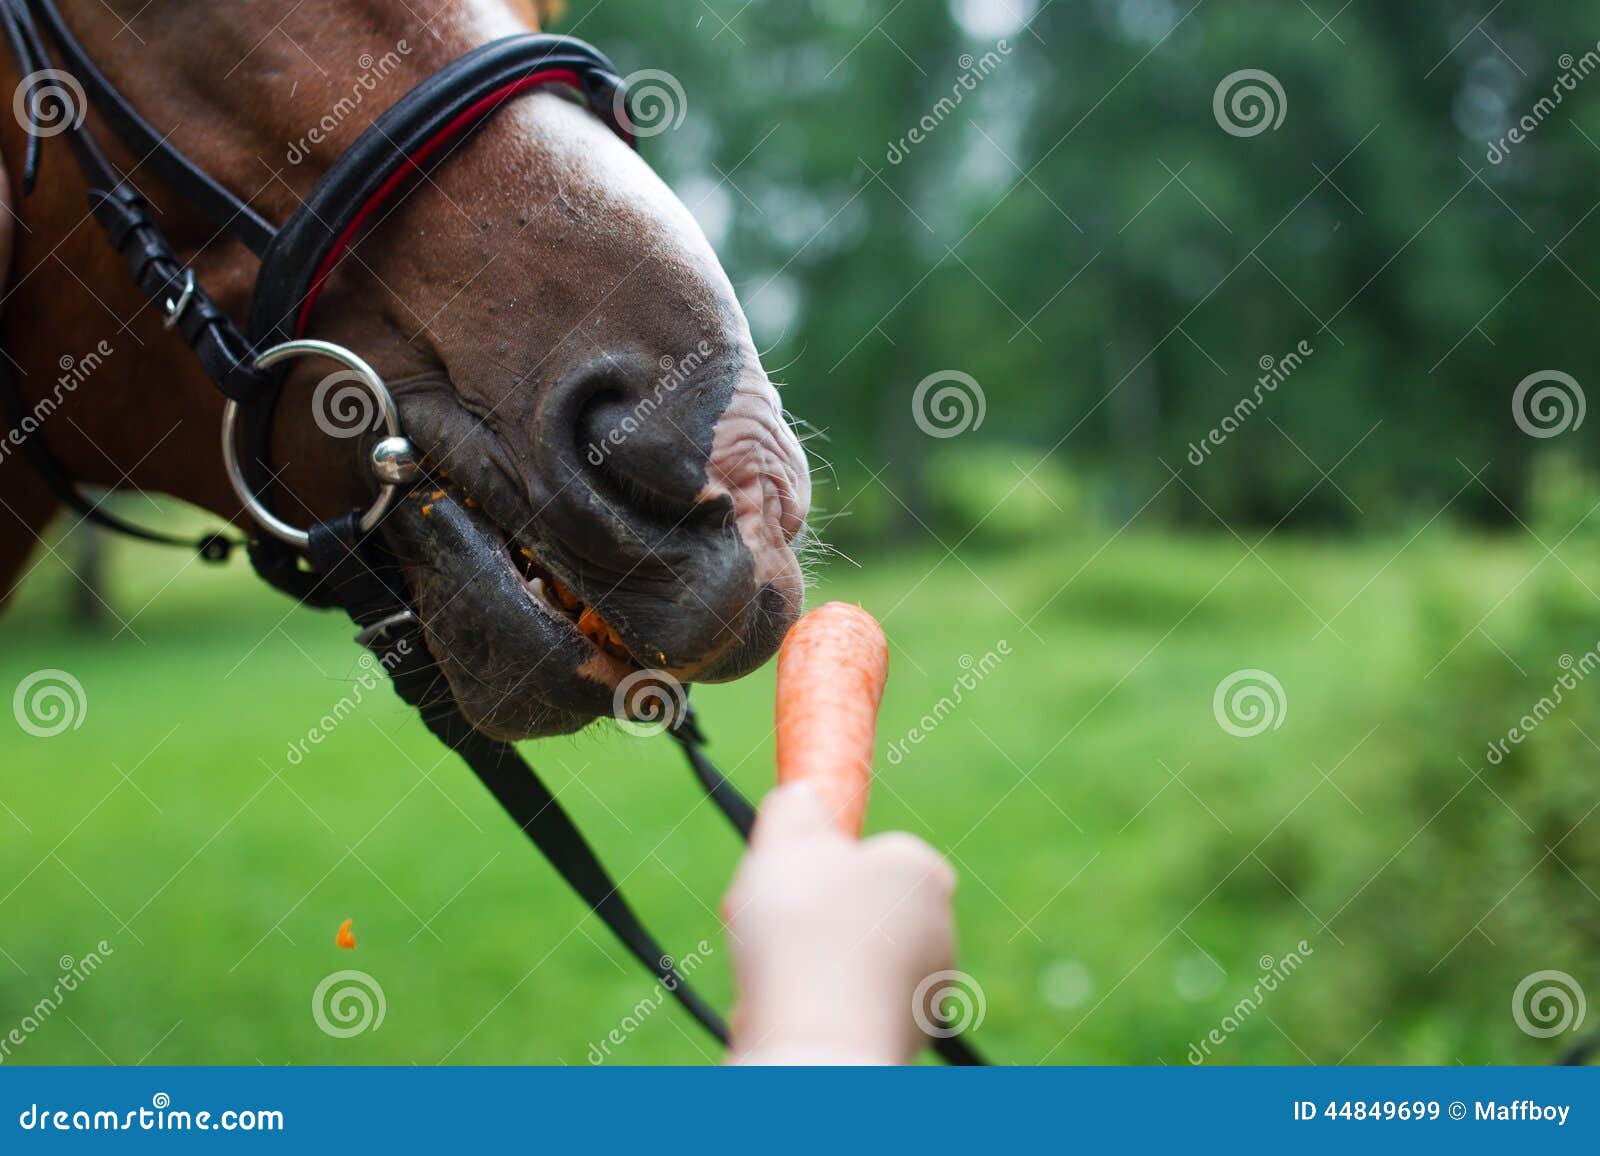 horse getting carrots from a females hand